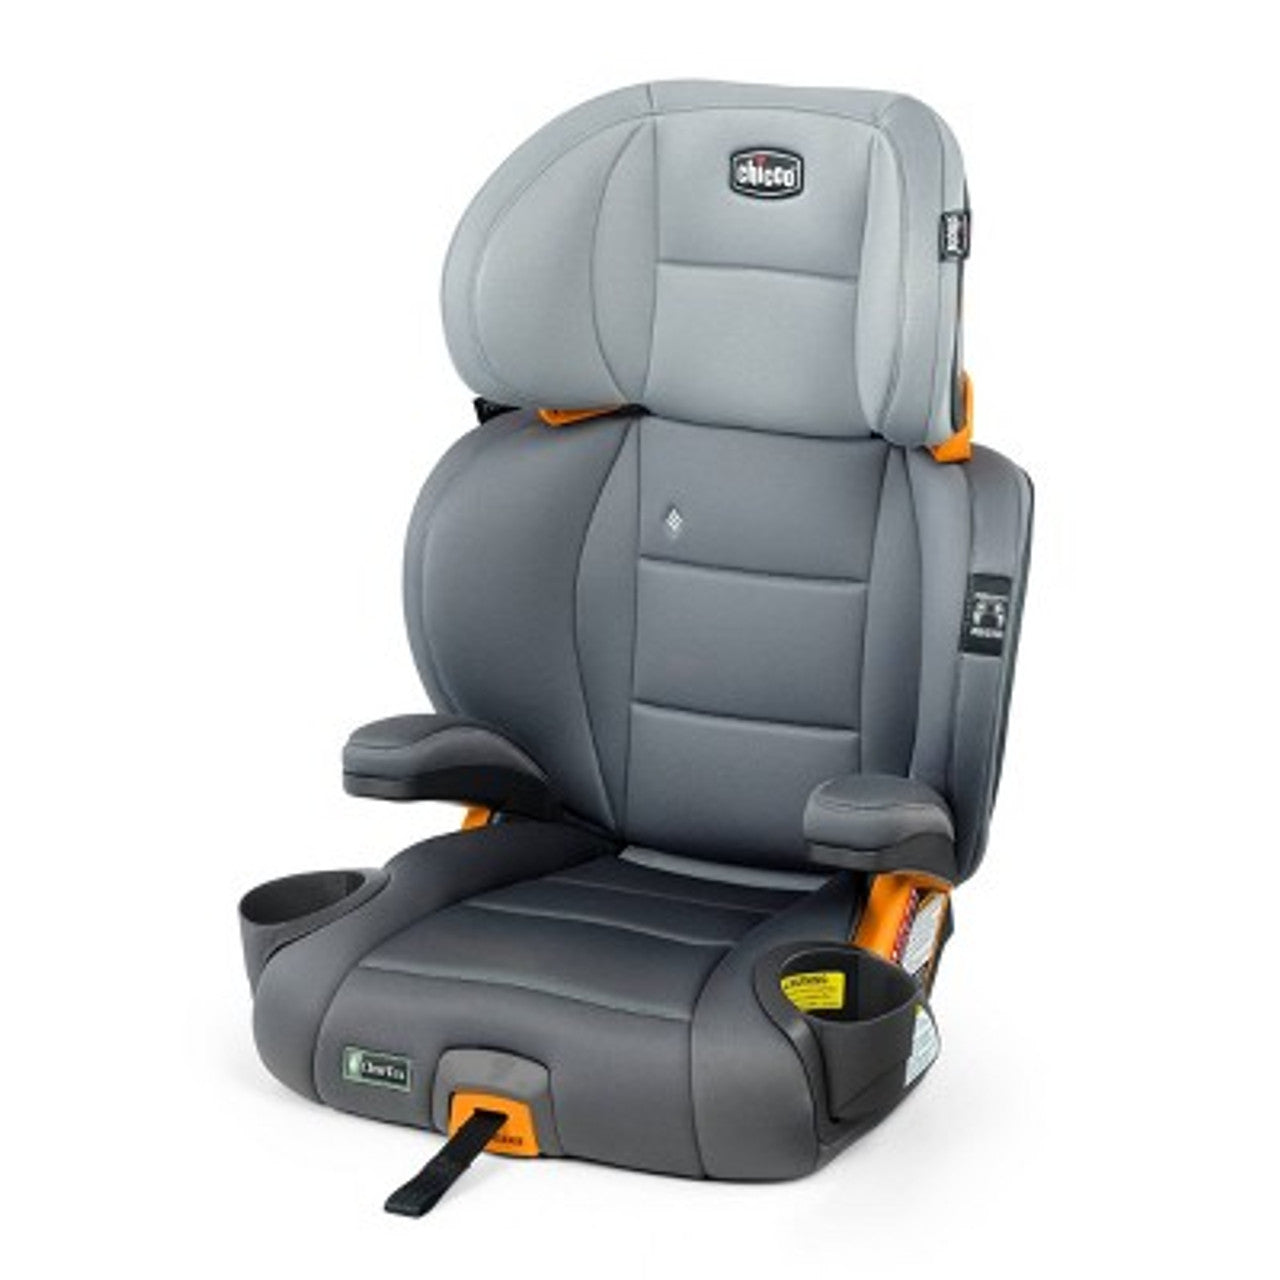 New - Chicco Kidfit ClearTex Plus High Back Booster Car Seat - Drift